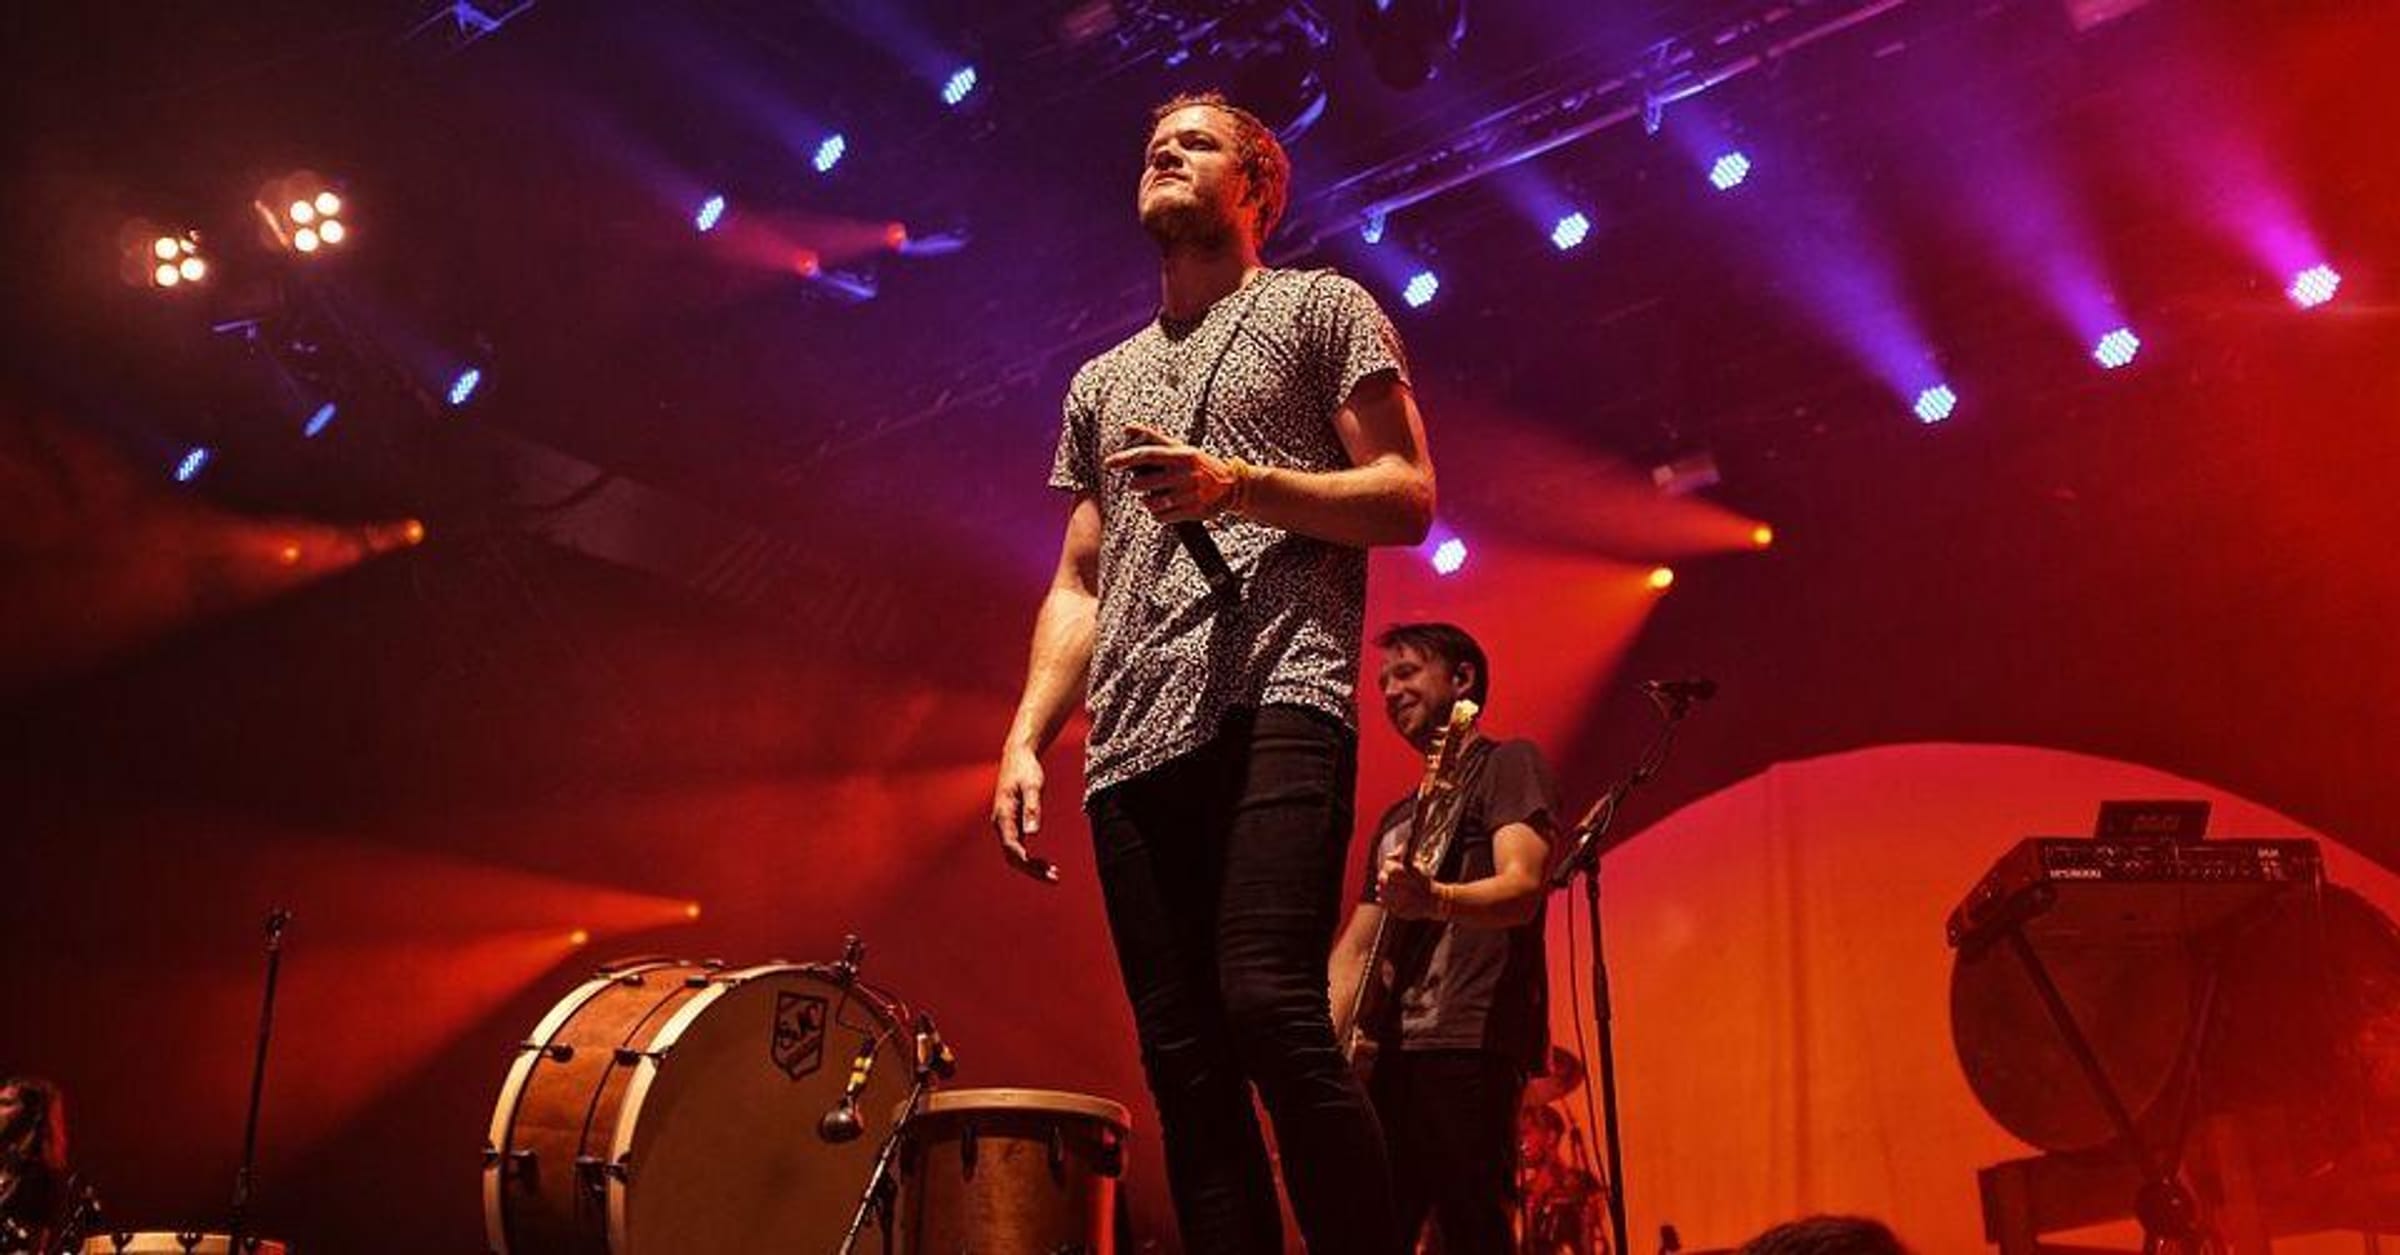 Hits decoded: 3 musical elements that make Imagine Dragons